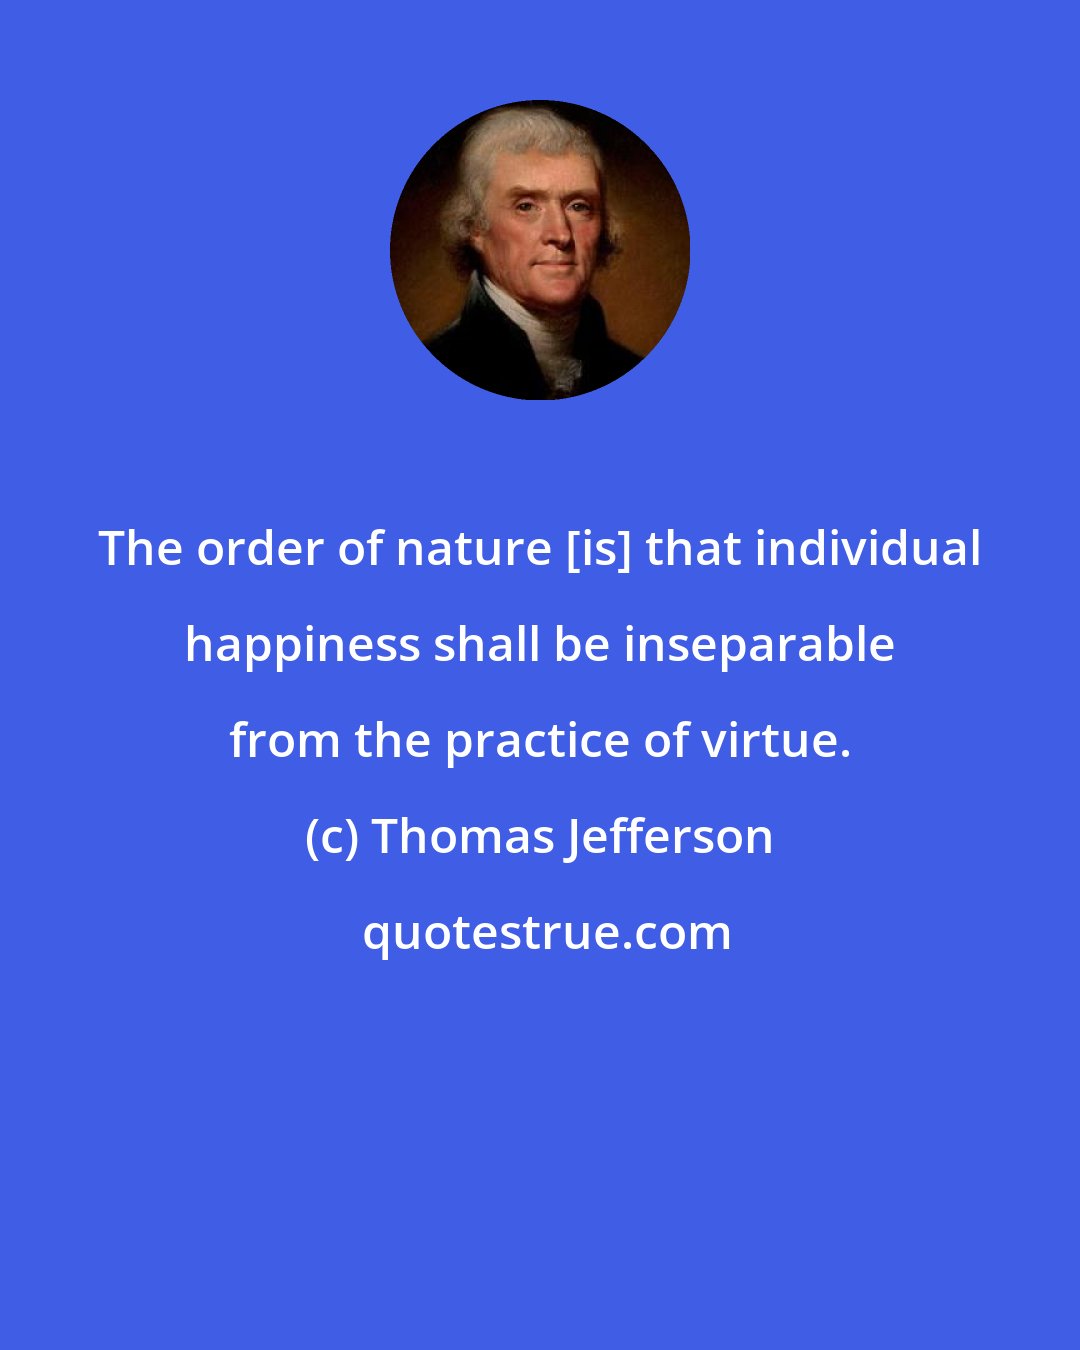 Thomas Jefferson: The order of nature [is] that individual happiness shall be inseparable from the practice of virtue.